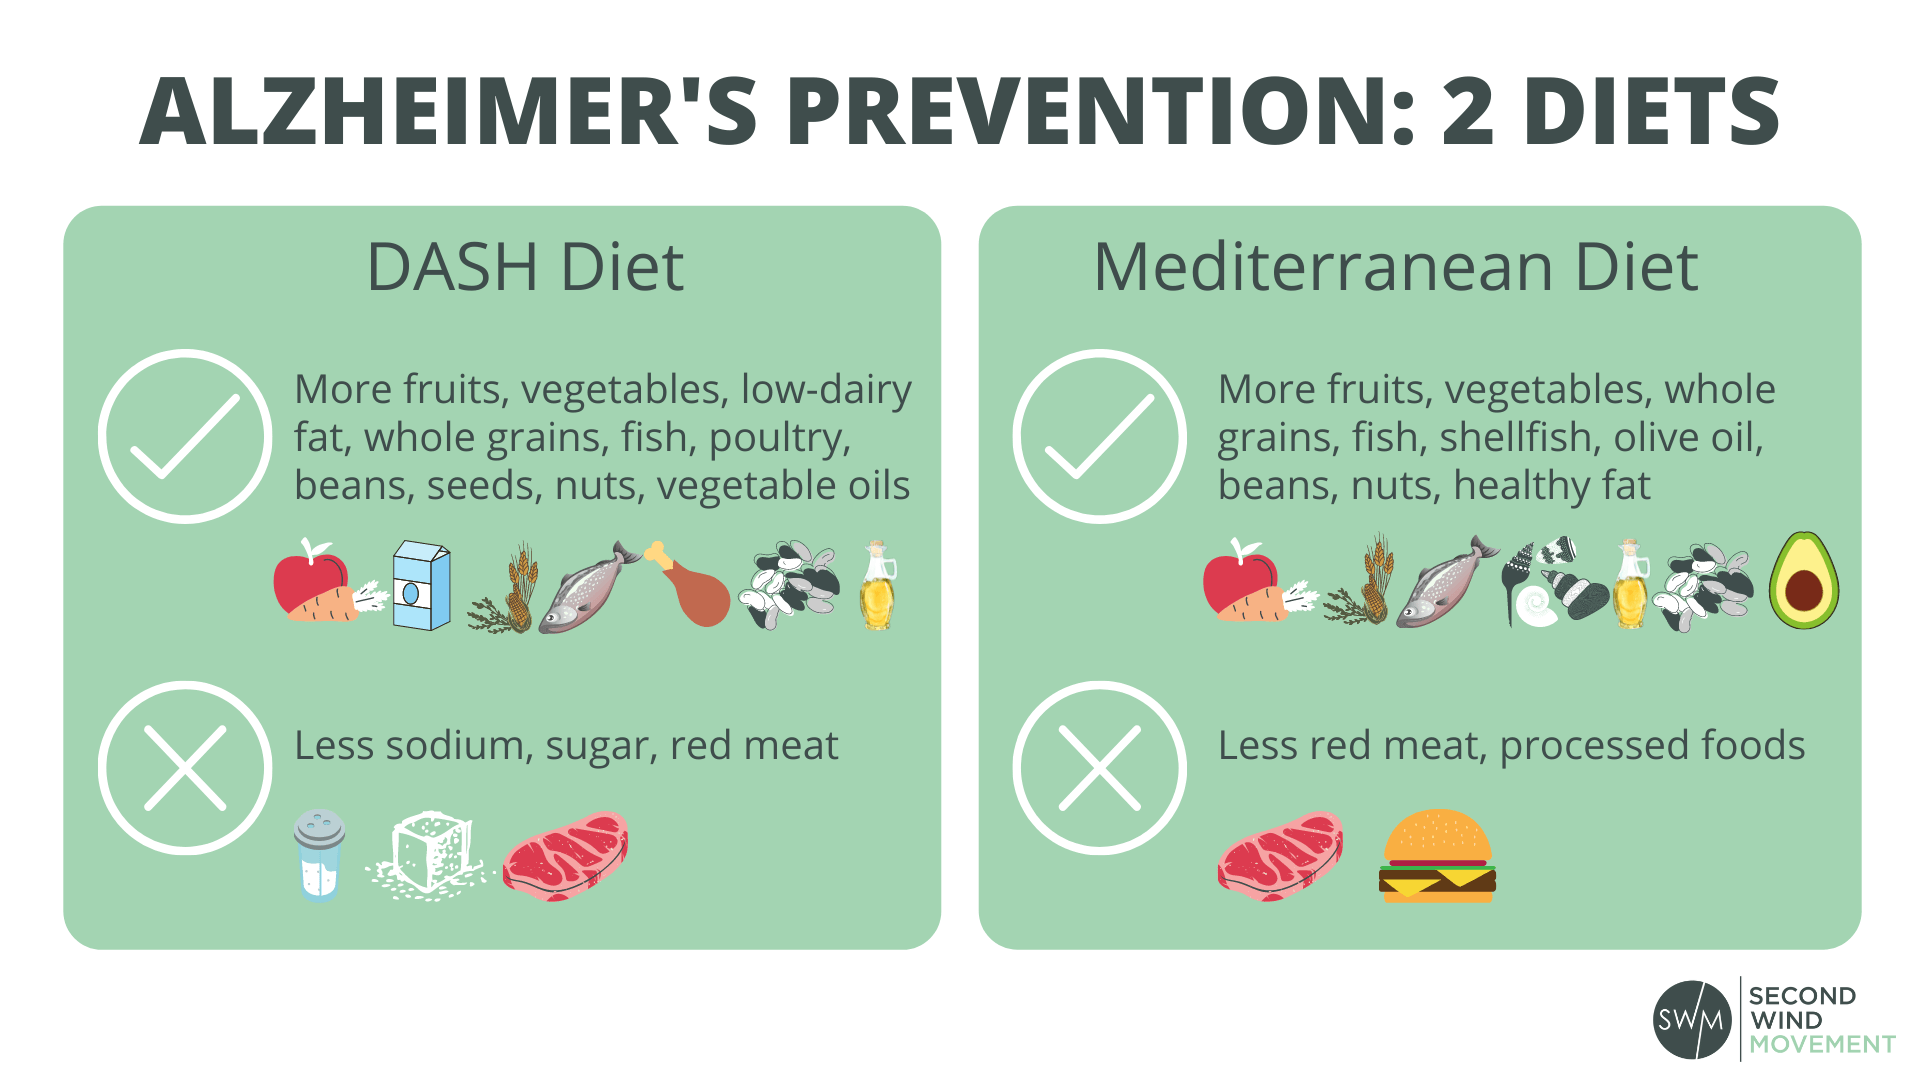 the best two diets for Alzheimer's prevention - the DASH diet and the Mediterranean diet